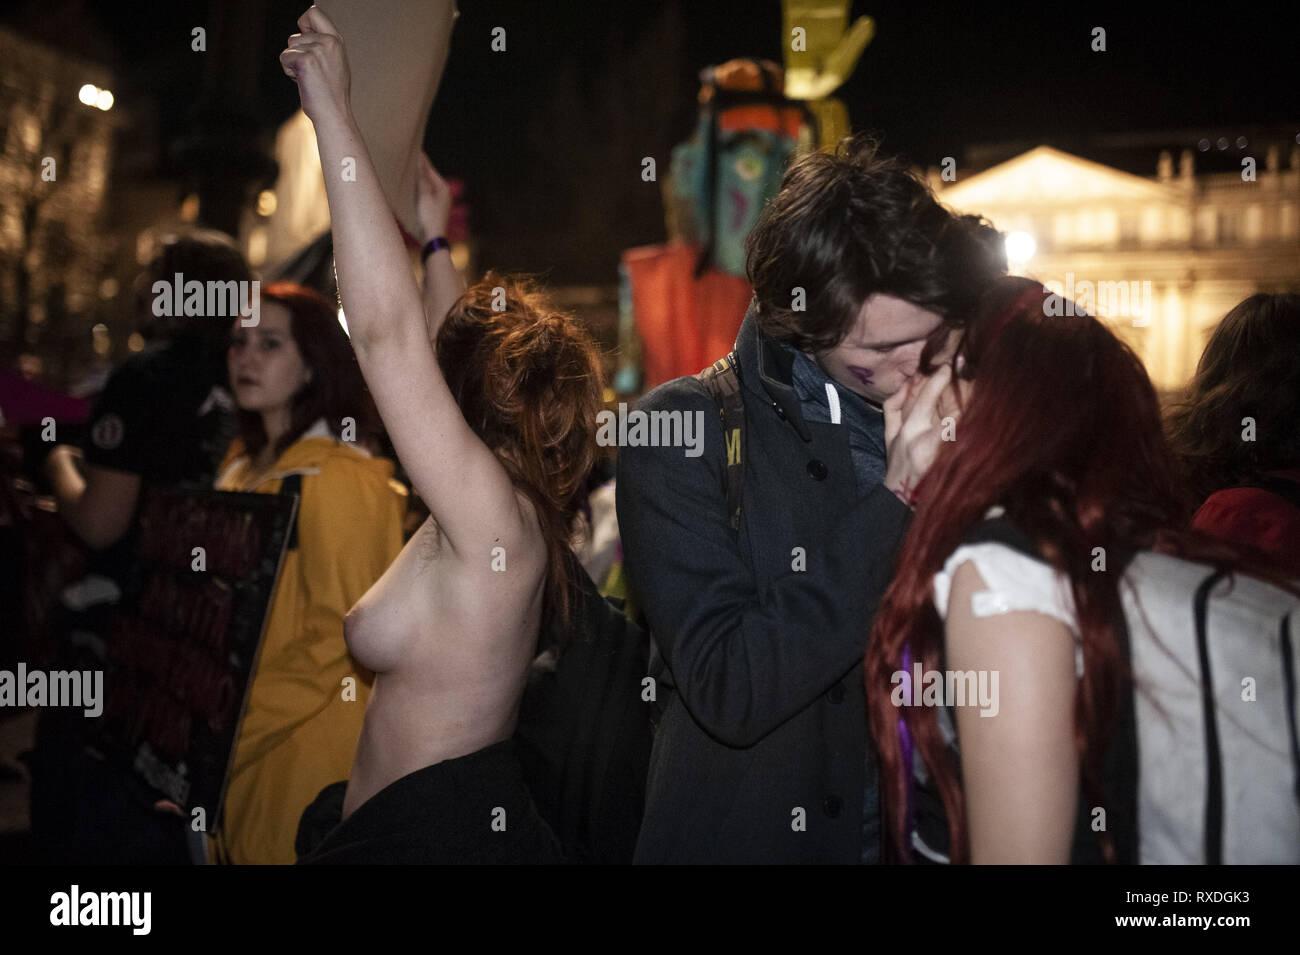 March 8, 2019 - Milano, Lombardia, Italy - A woman without a bra is seen  asking for body freedom next to a couple kissing during the protest..The  network Non Una di Meno